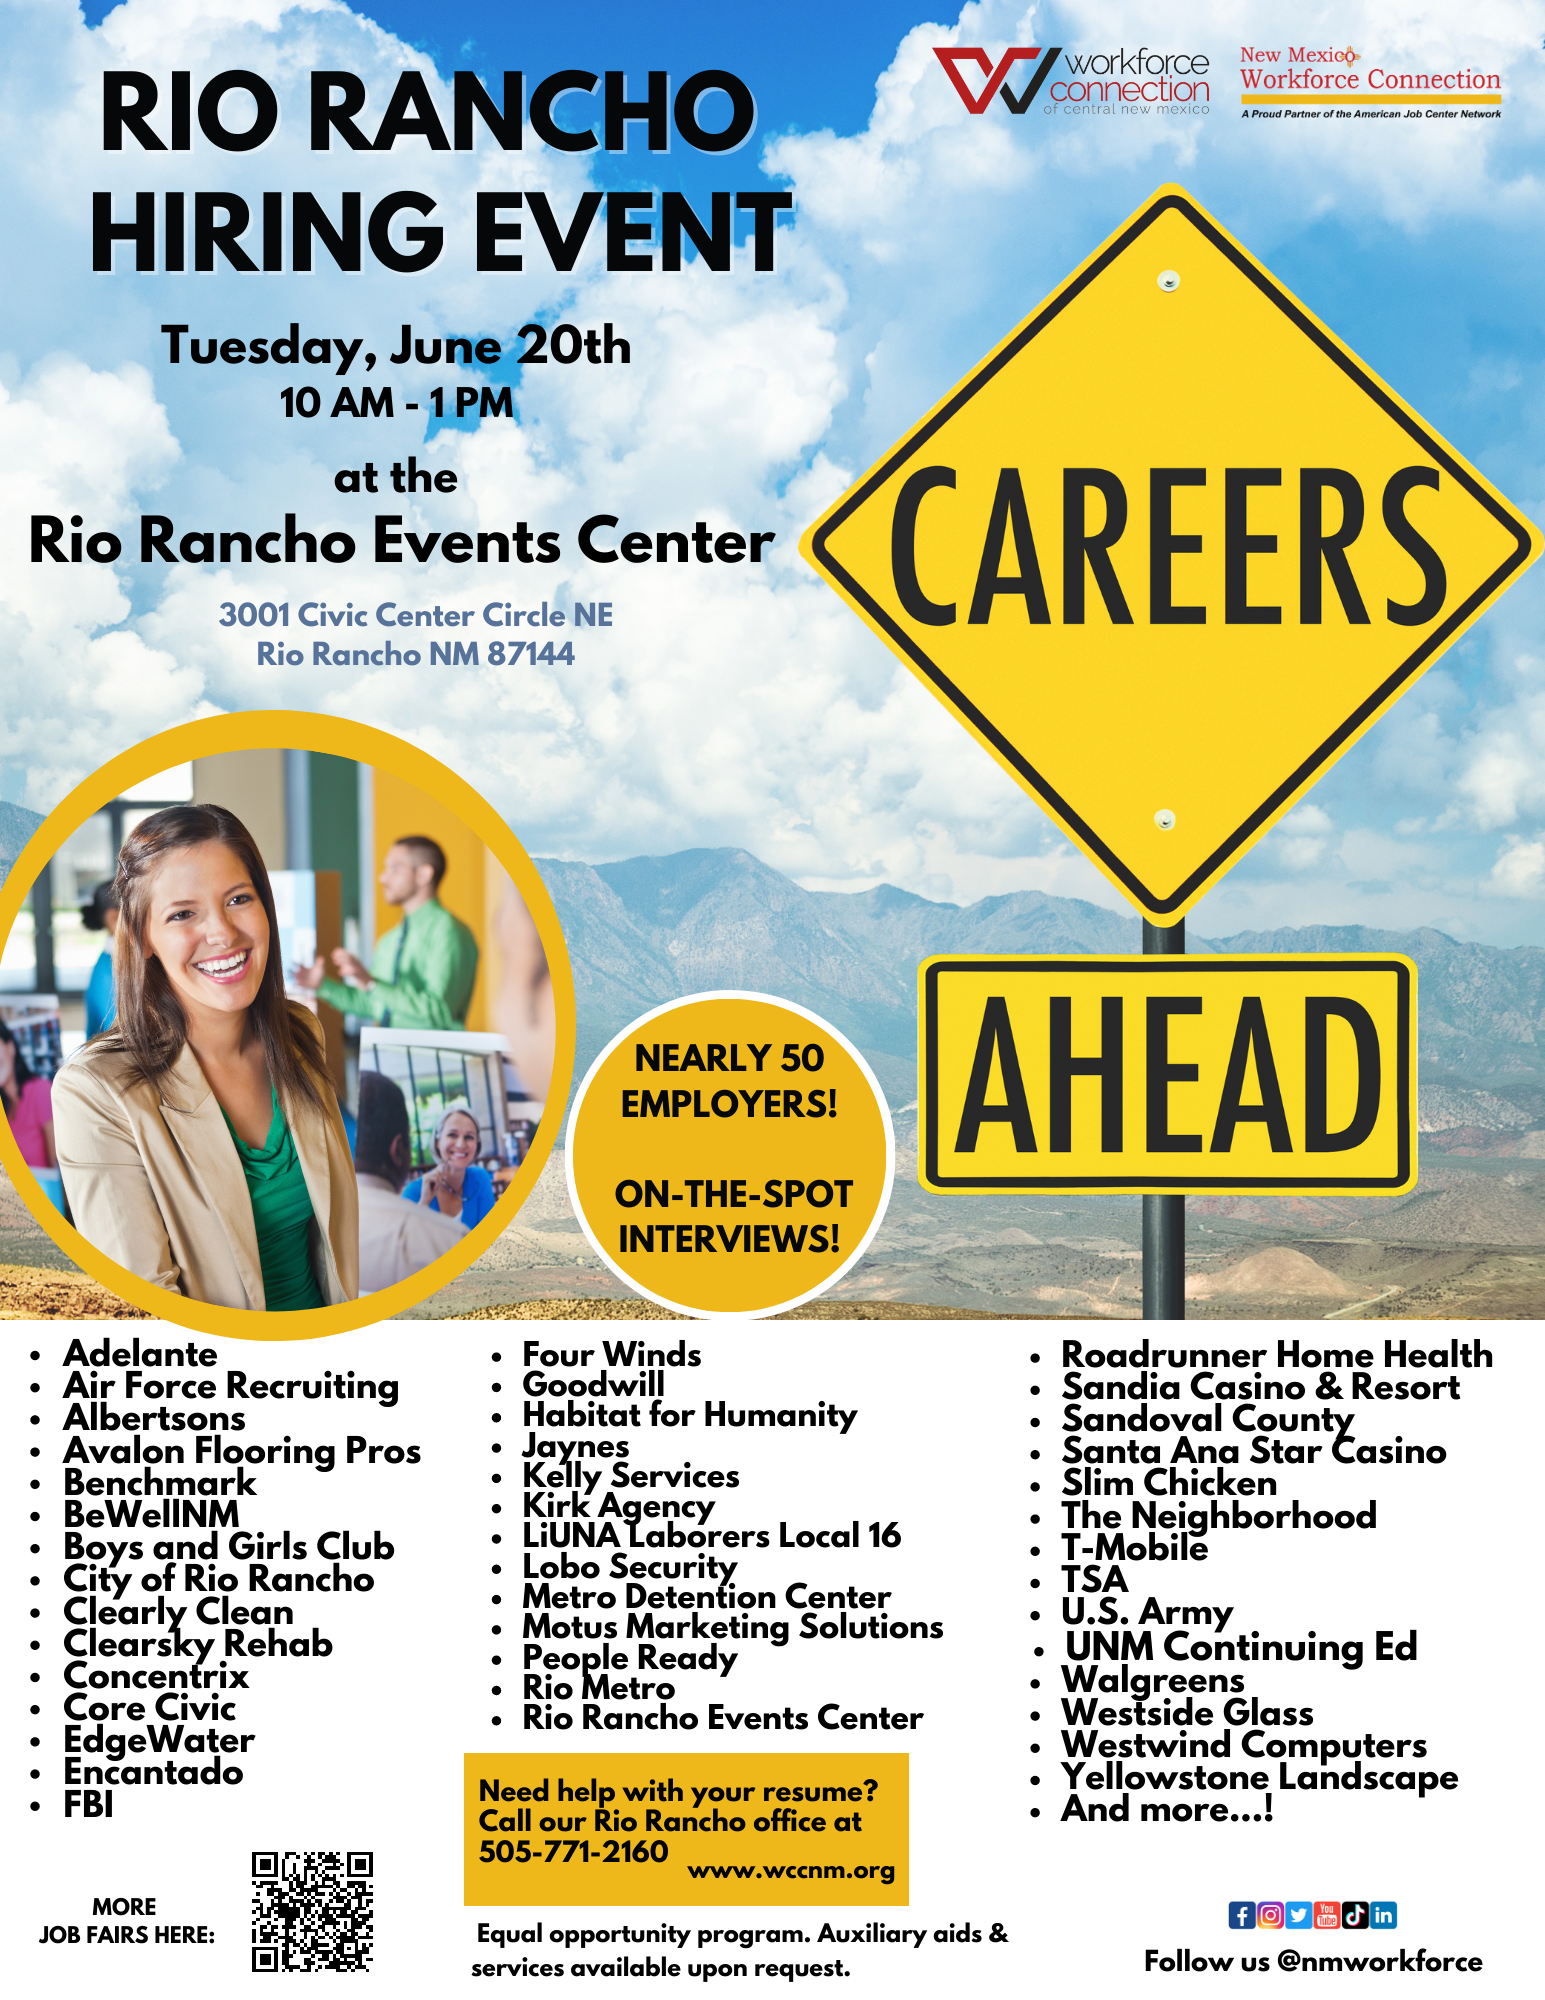 Rio Rancho Hiring Event with 40 employers and a variety of career options